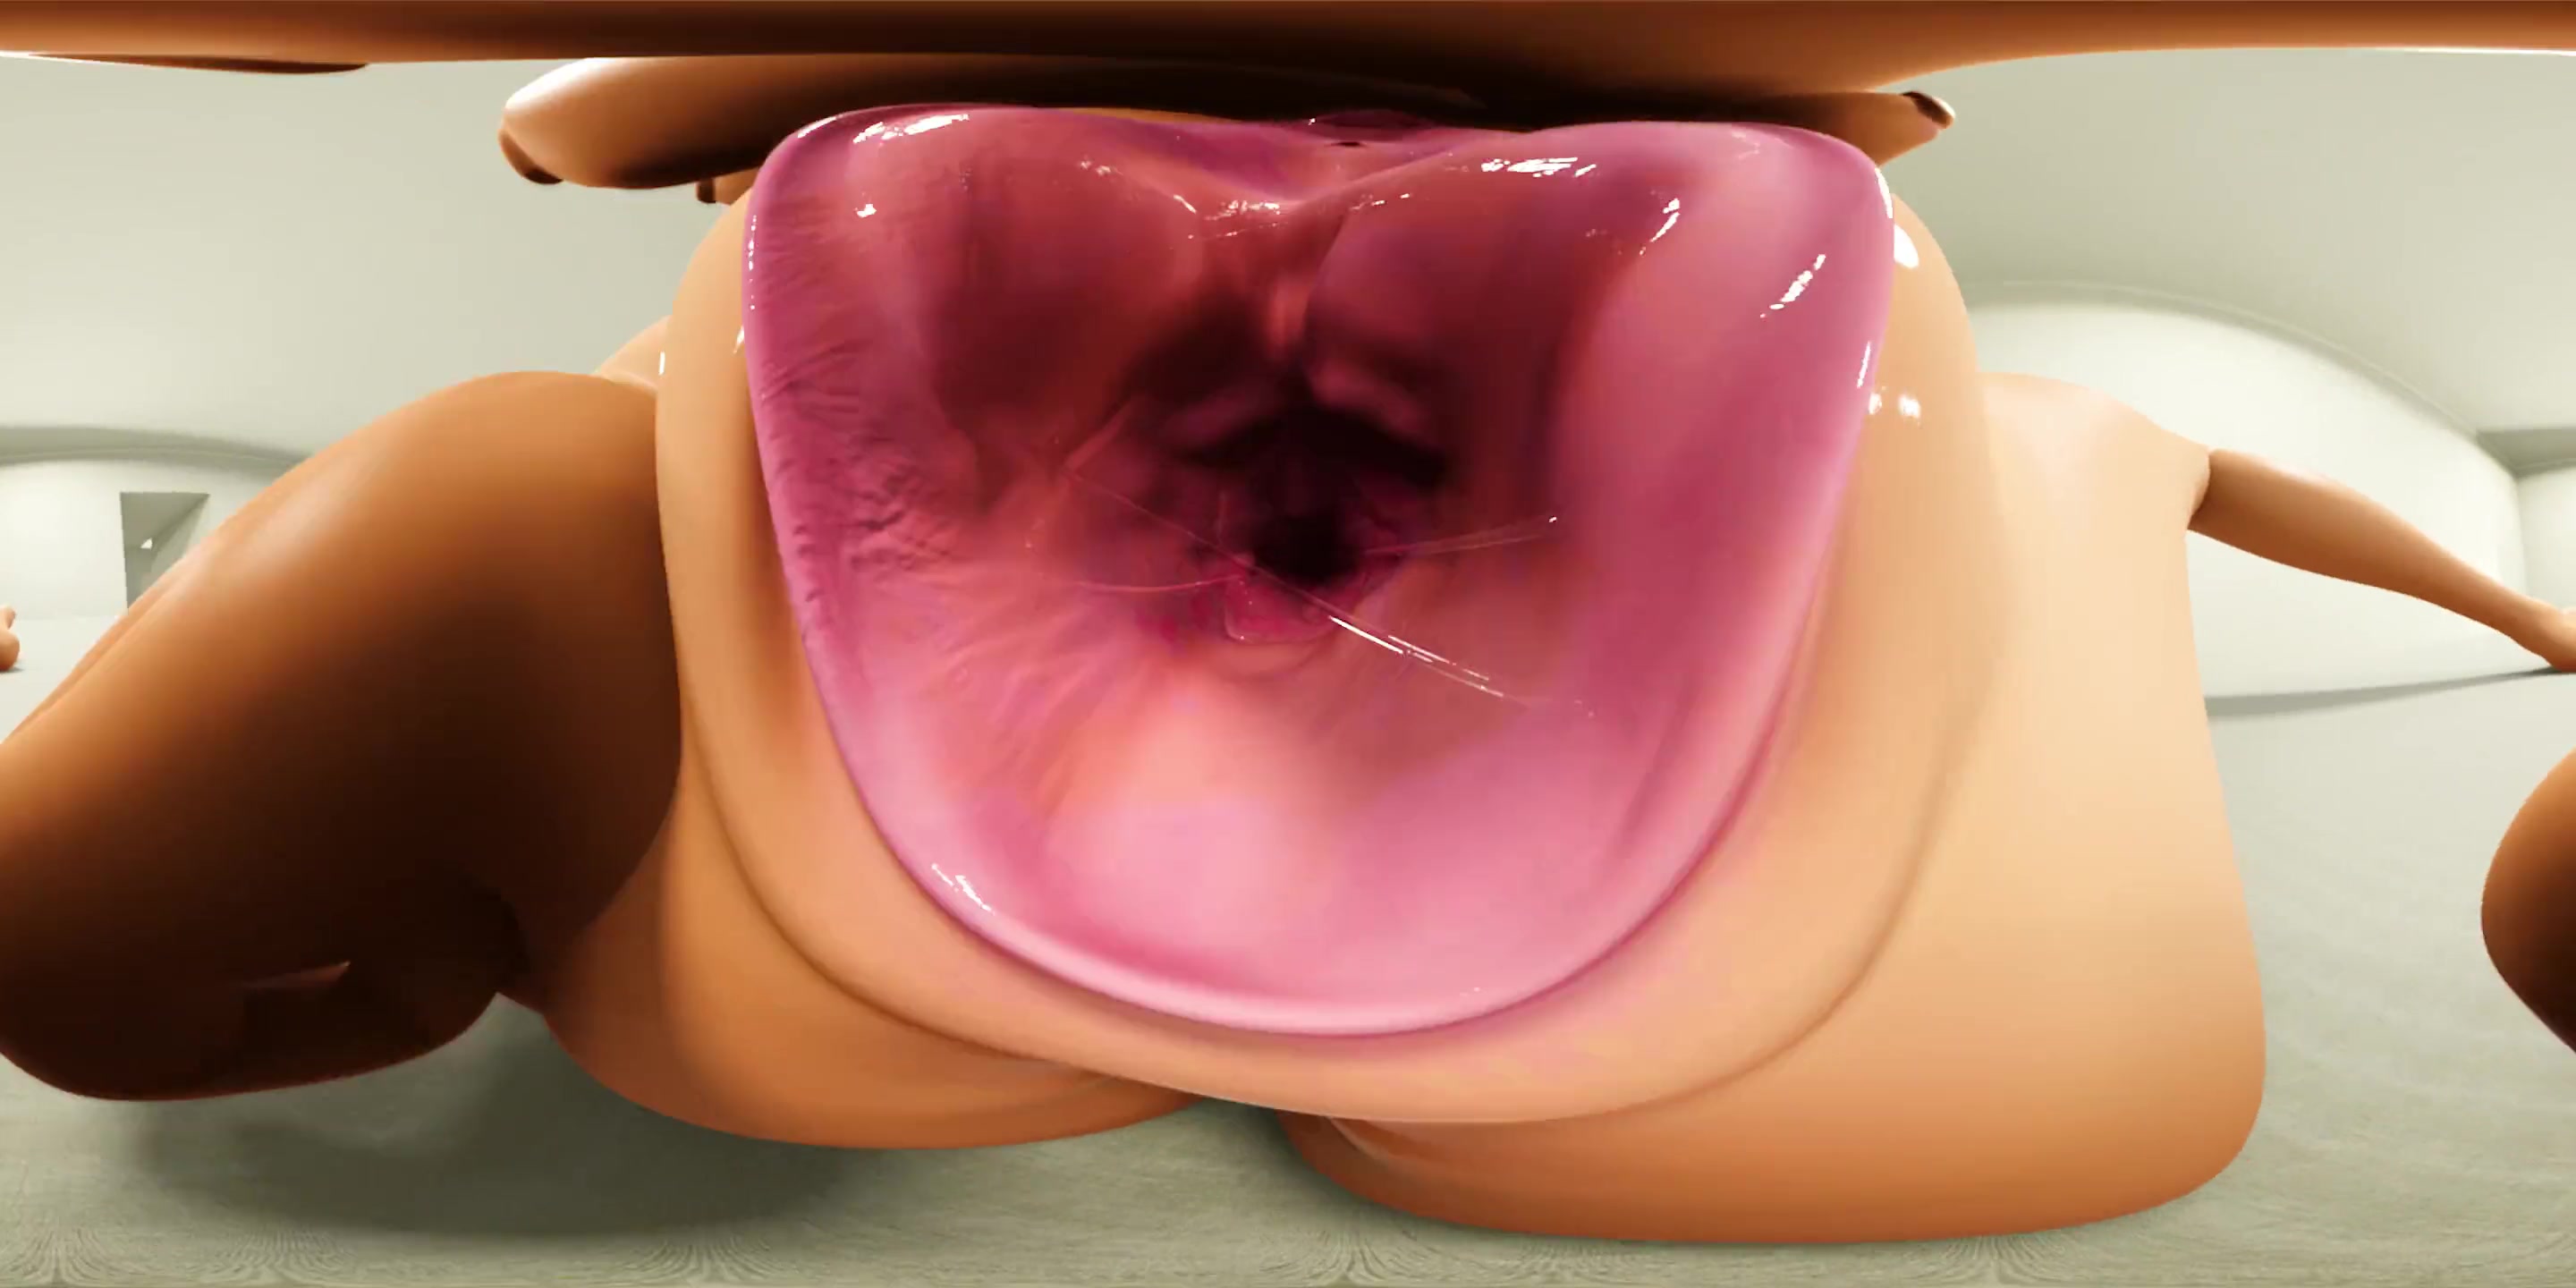 Mia 3D swallowed you (VR)